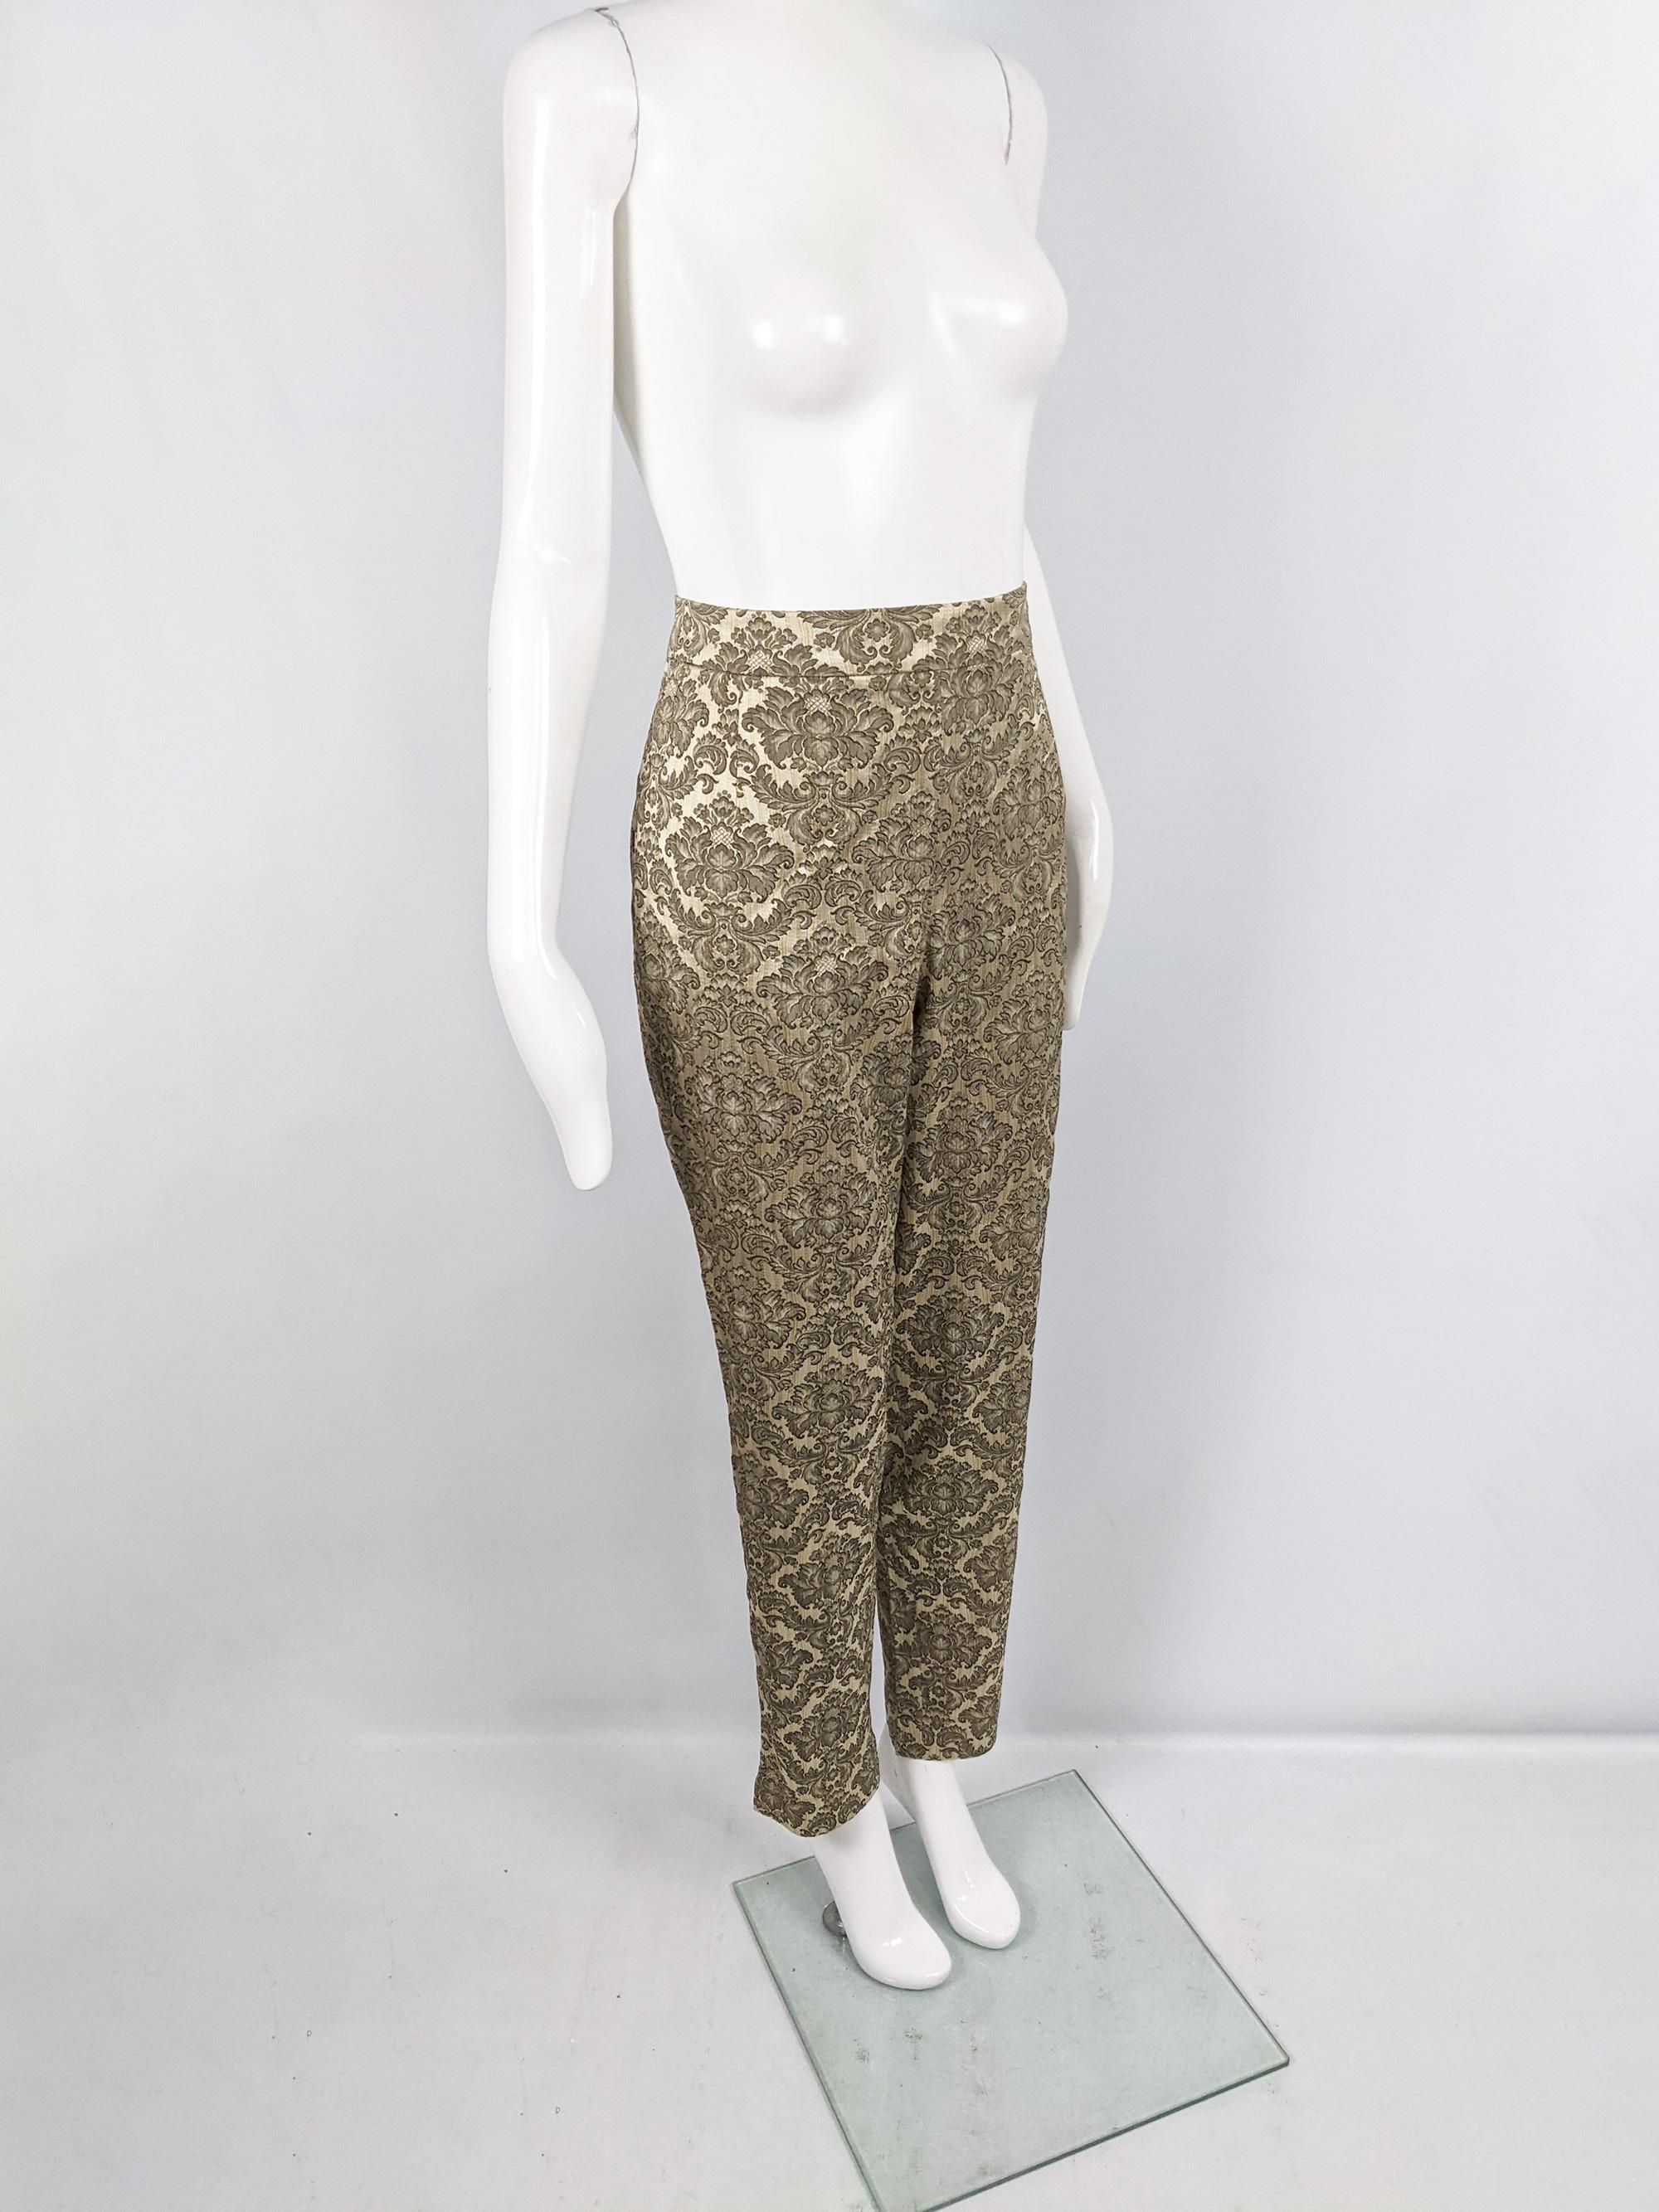 Harrods Vintage 80s Gold Damask Satin Jacquard High Waist Cigarette Pants, 1980s In Excellent Condition In Doncaster, South Yorkshire